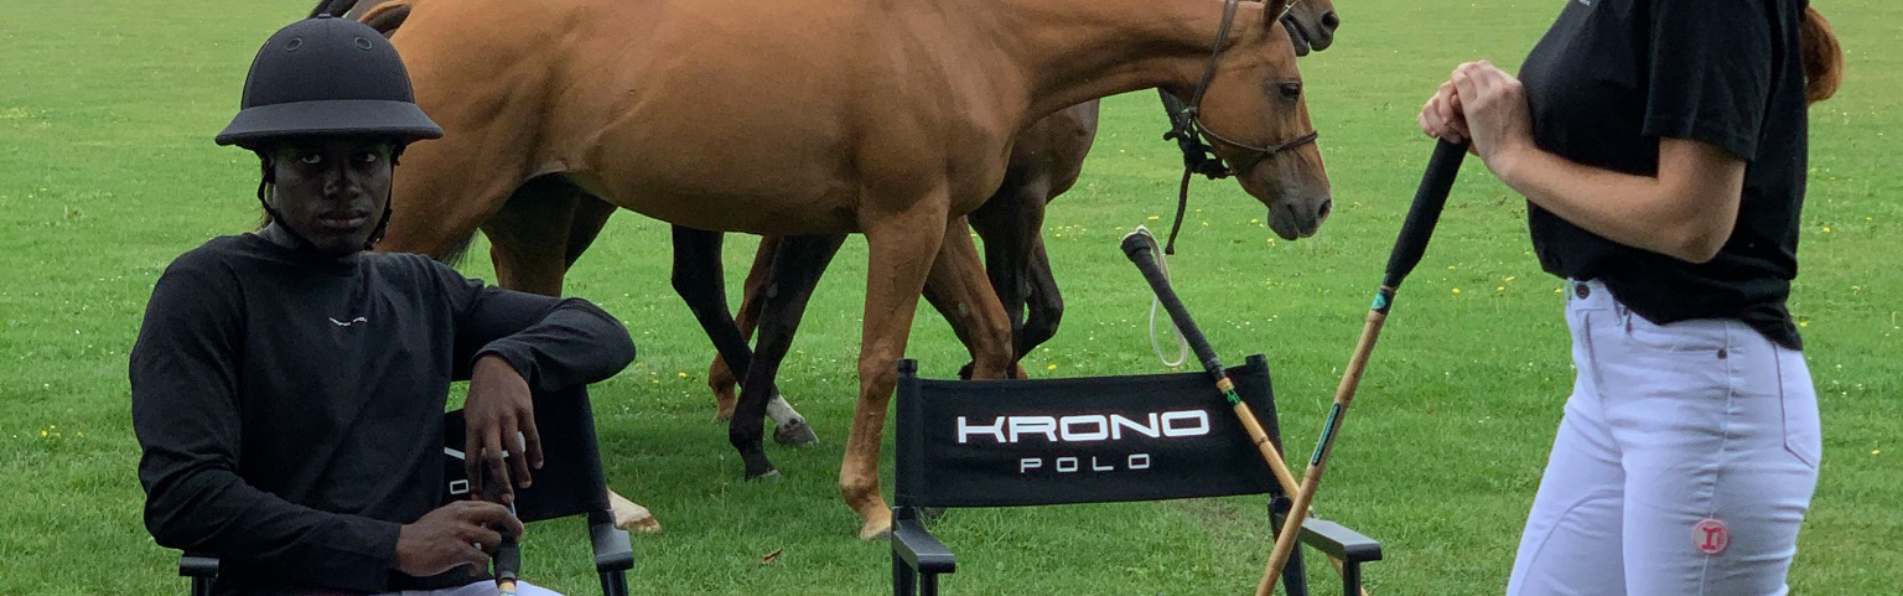 https://www.kronopolo.es/image/cache/catalog/BLOG%20PHOTOS/learn%20to%20play%20polo-1903x596.png